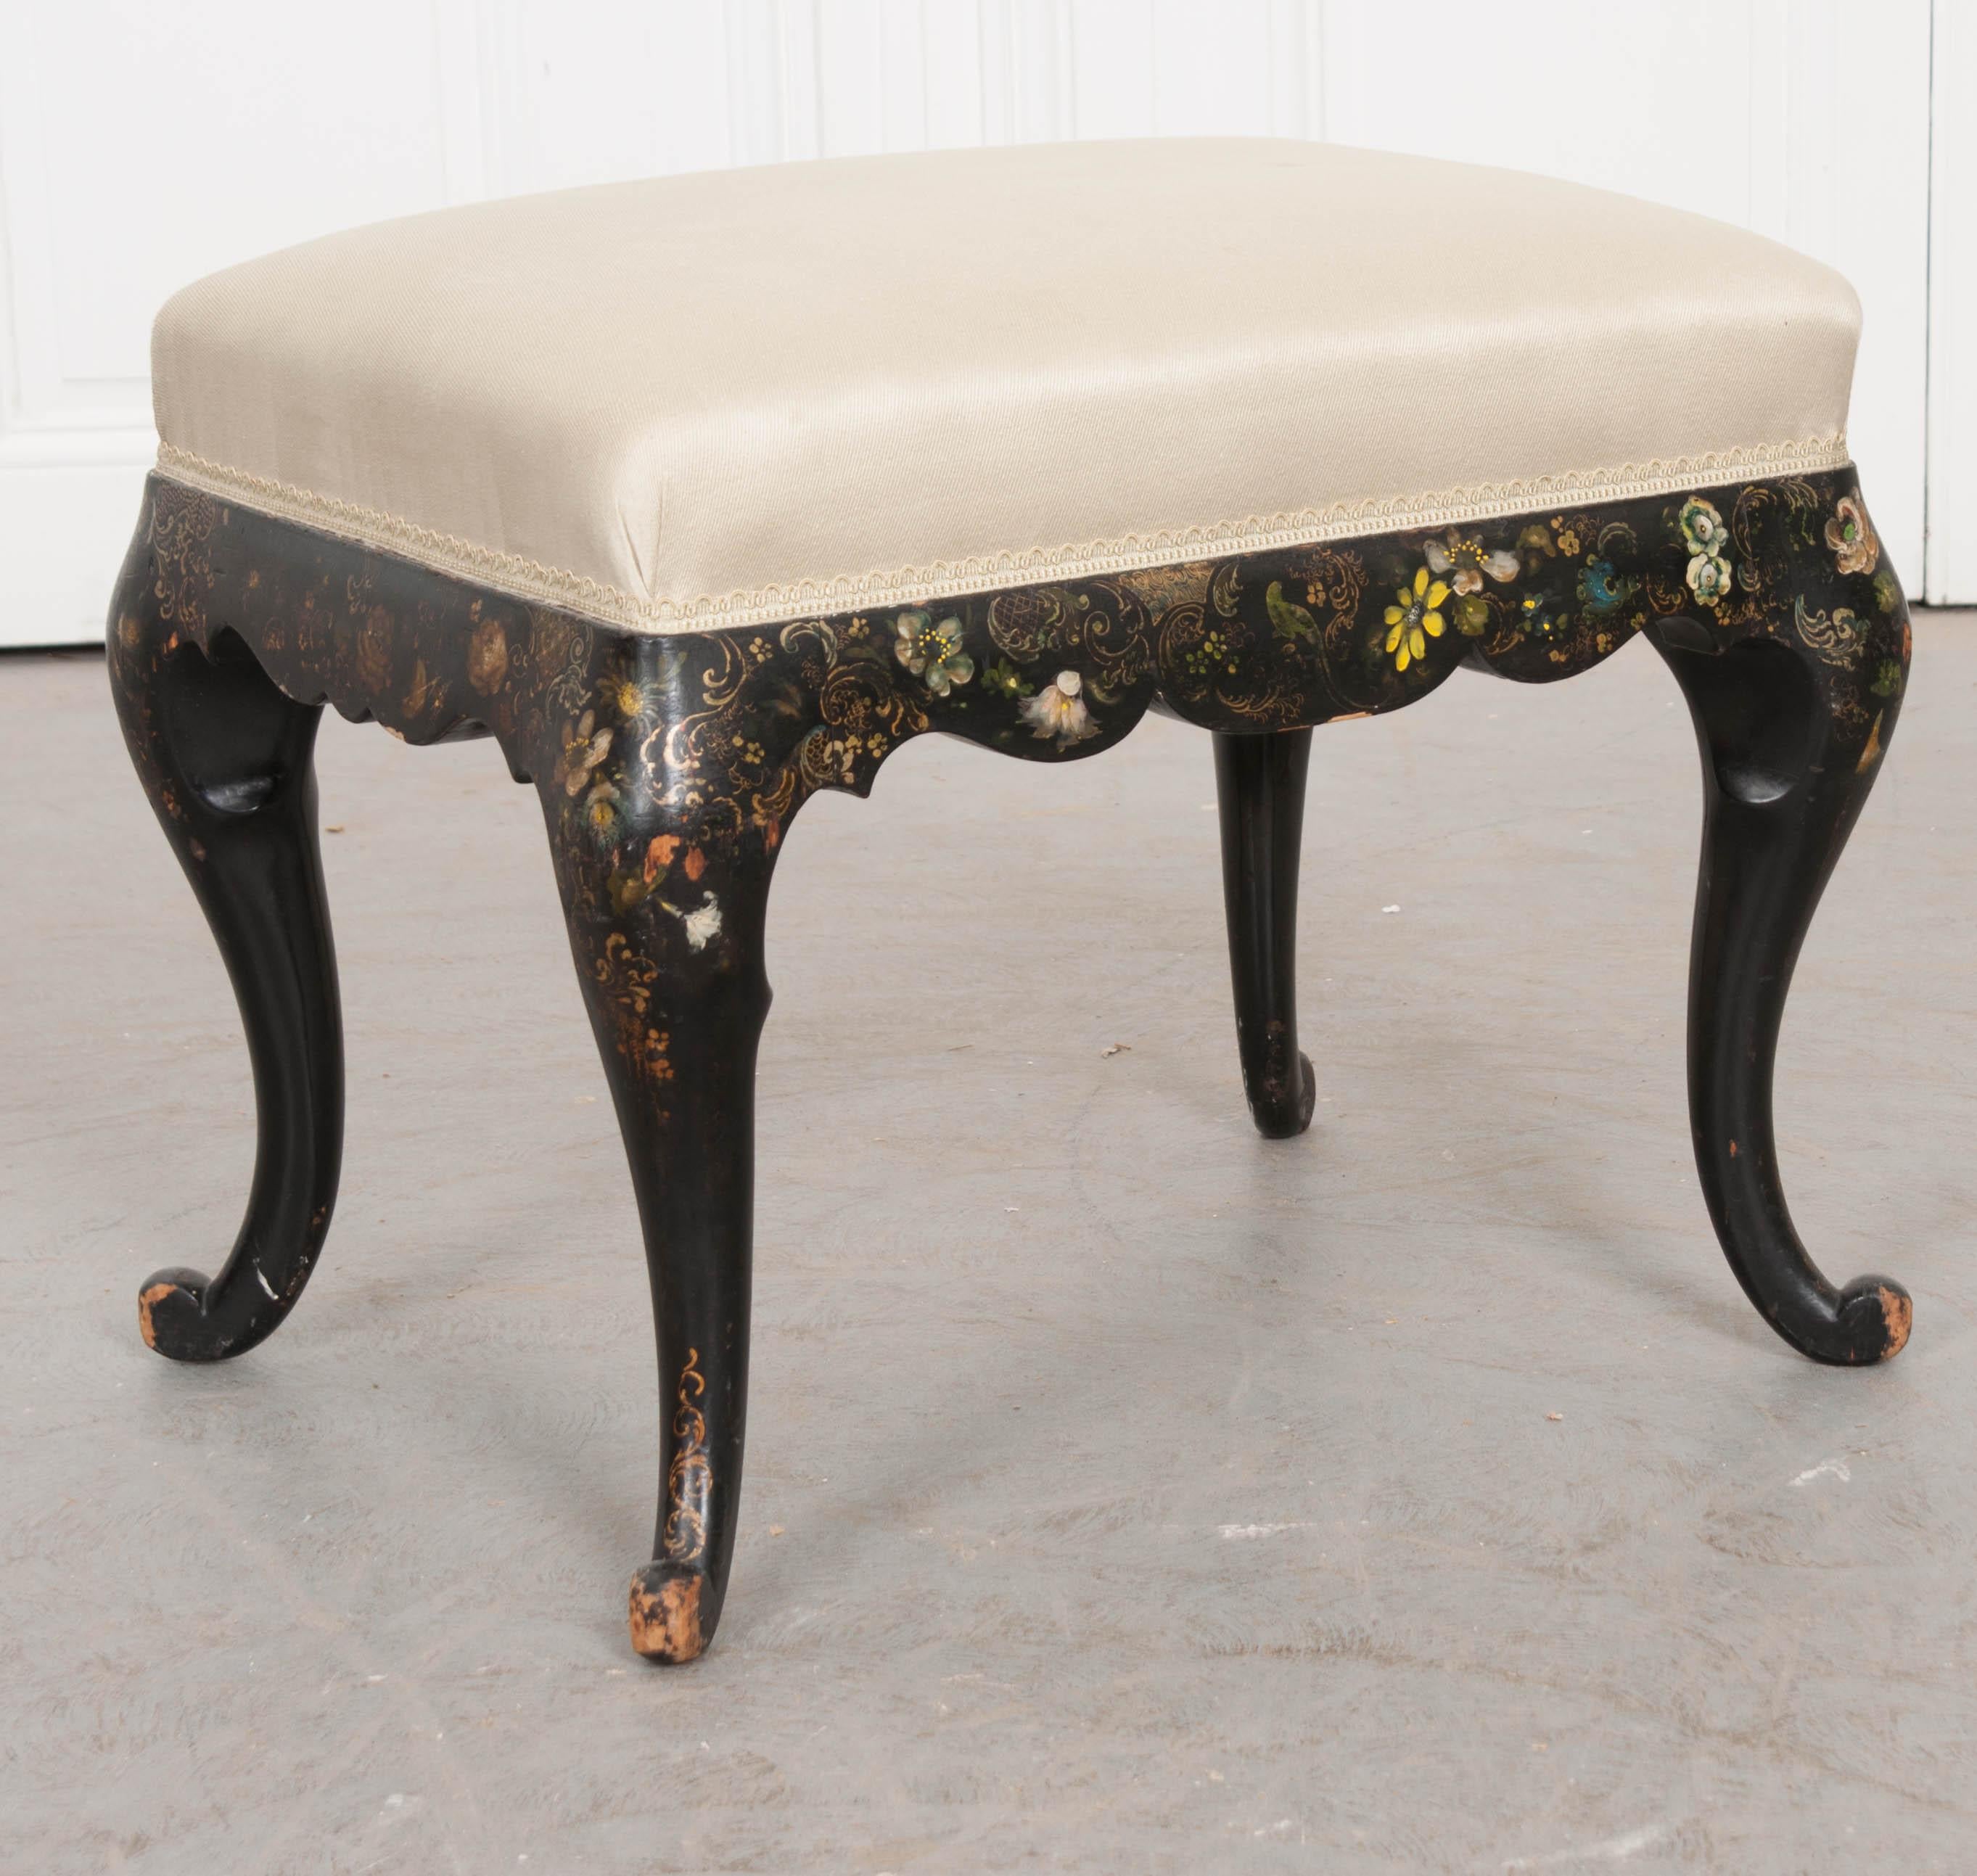 Hardwood Early-20th Century English Chinoiserie Hand-Painted and Cabriole Leg Stool For Sale